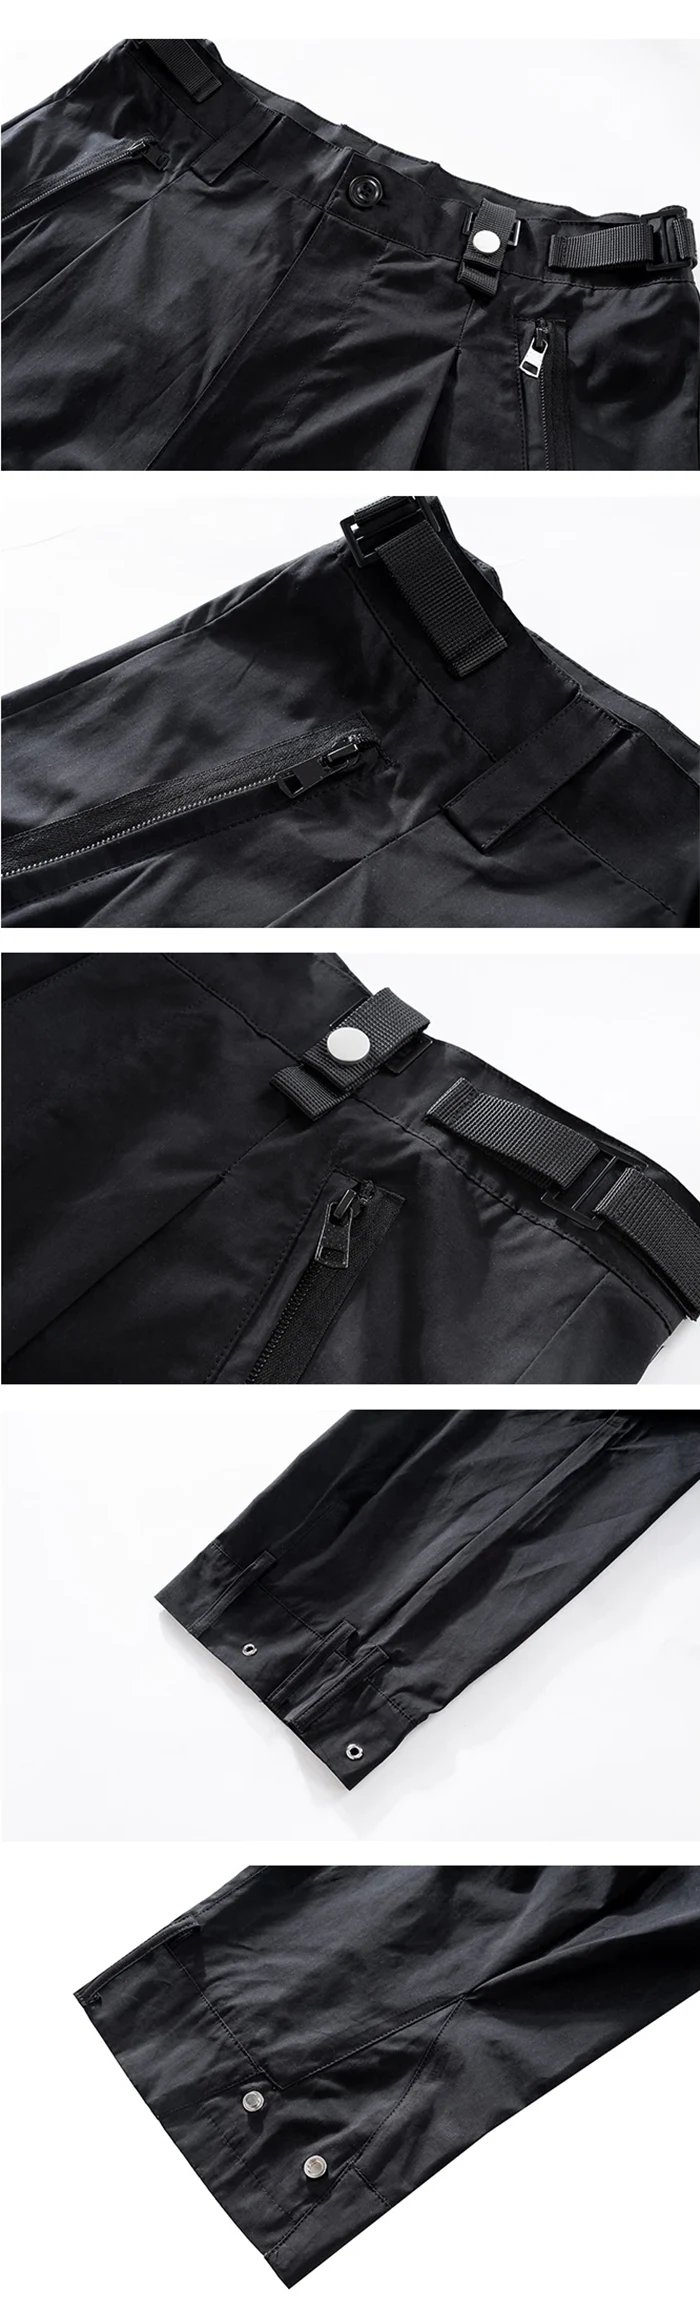 more details of the Black cargo pants "Annaka"